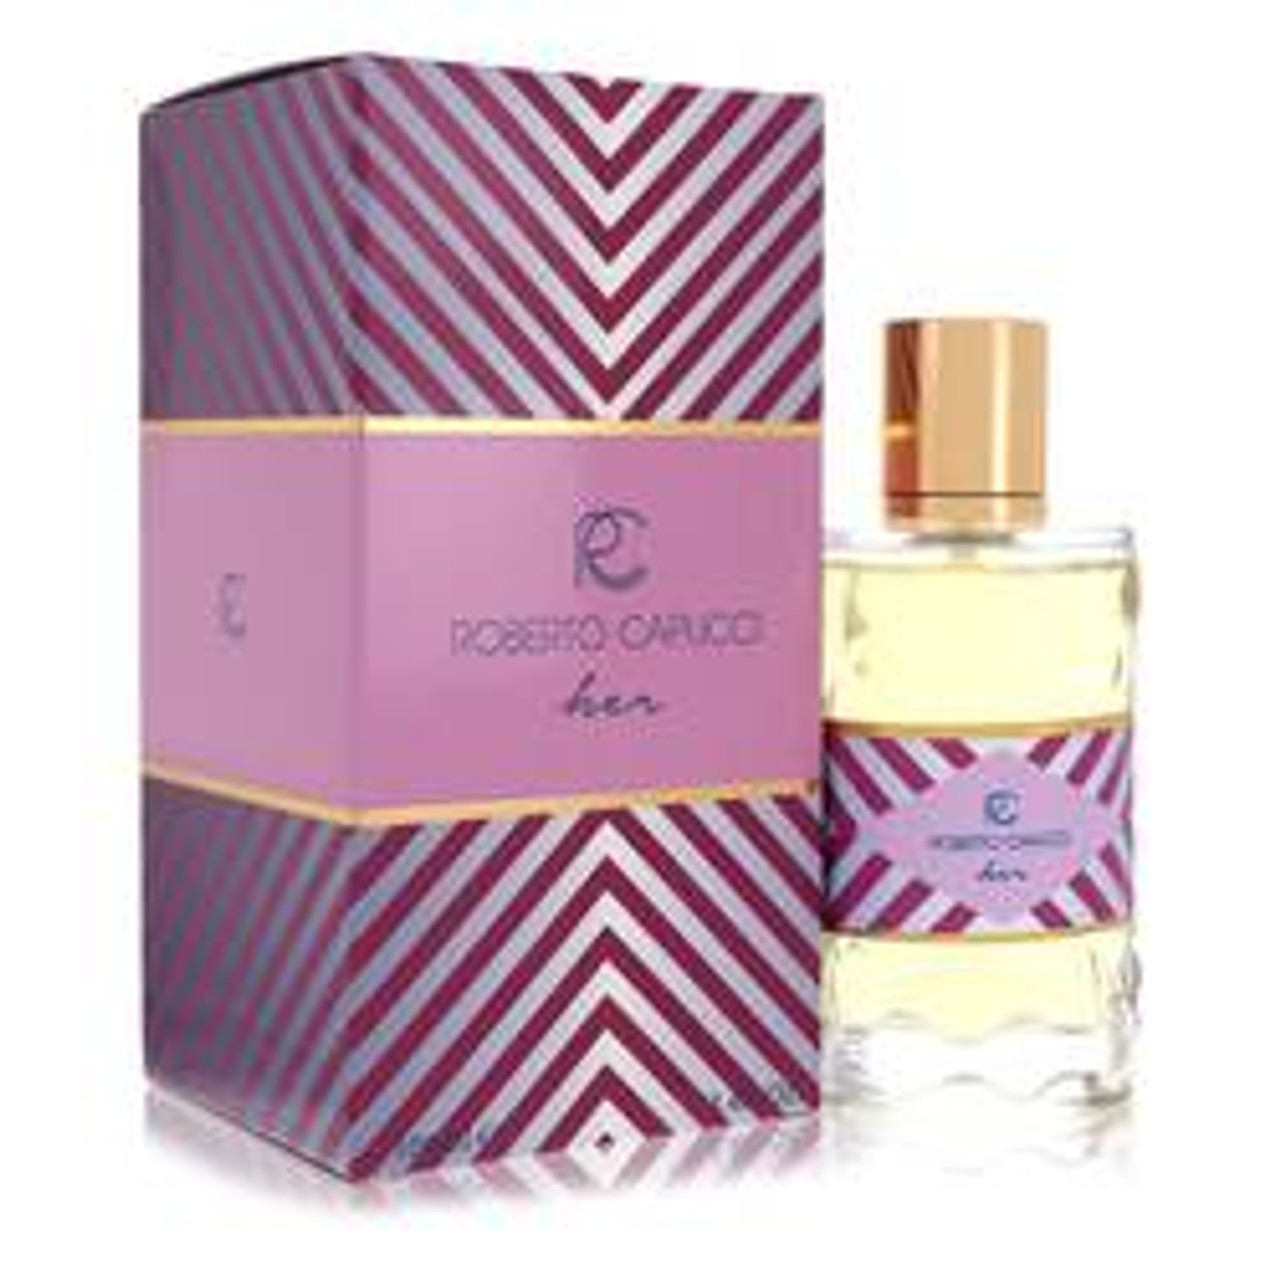 Roberto Capucci Perfume By Capucci Eau De Parfum Spray 3.4 oz for Women - [From 50.33 - Choose pk Qty ] - *Ships from Miami